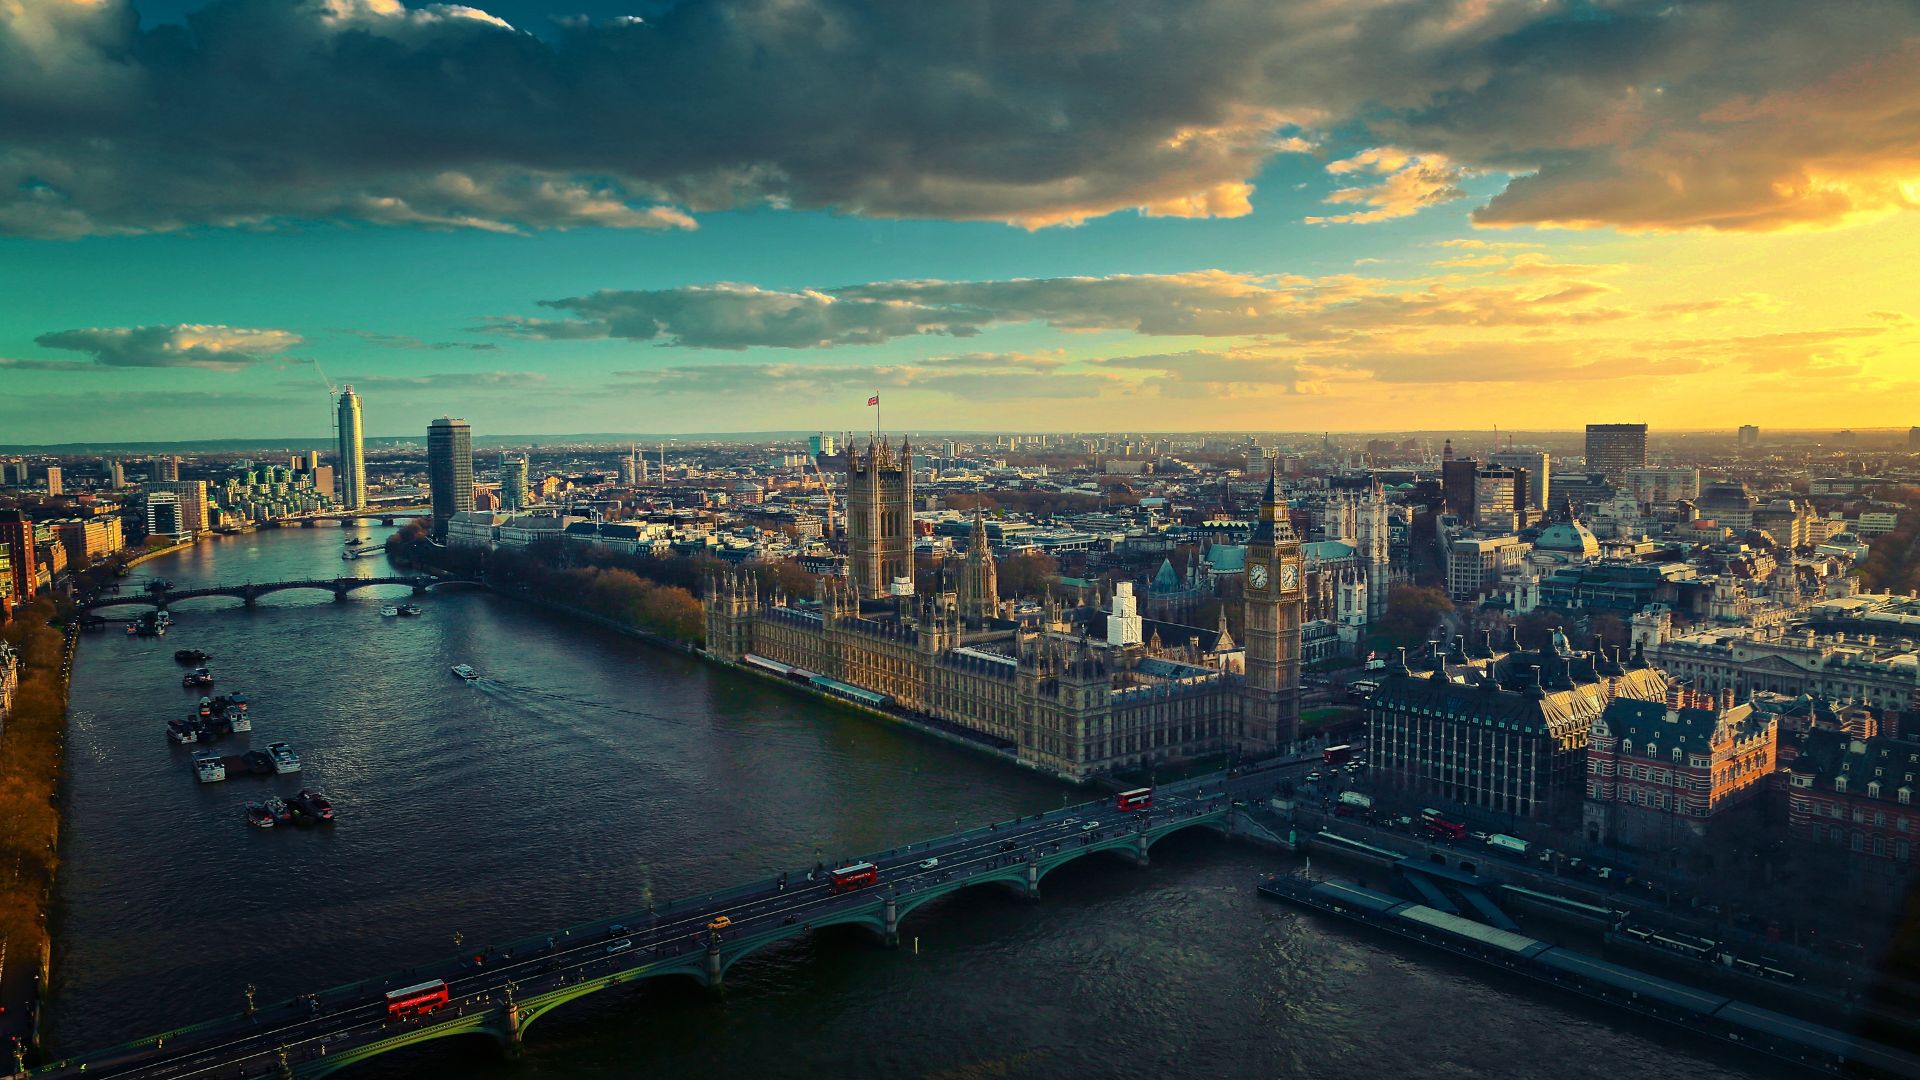 Birds-eye view of the City of London. The River Thames can be seen in the foreground, with other London famous buildings including the Tower of London and Houses of Parliament in the background.